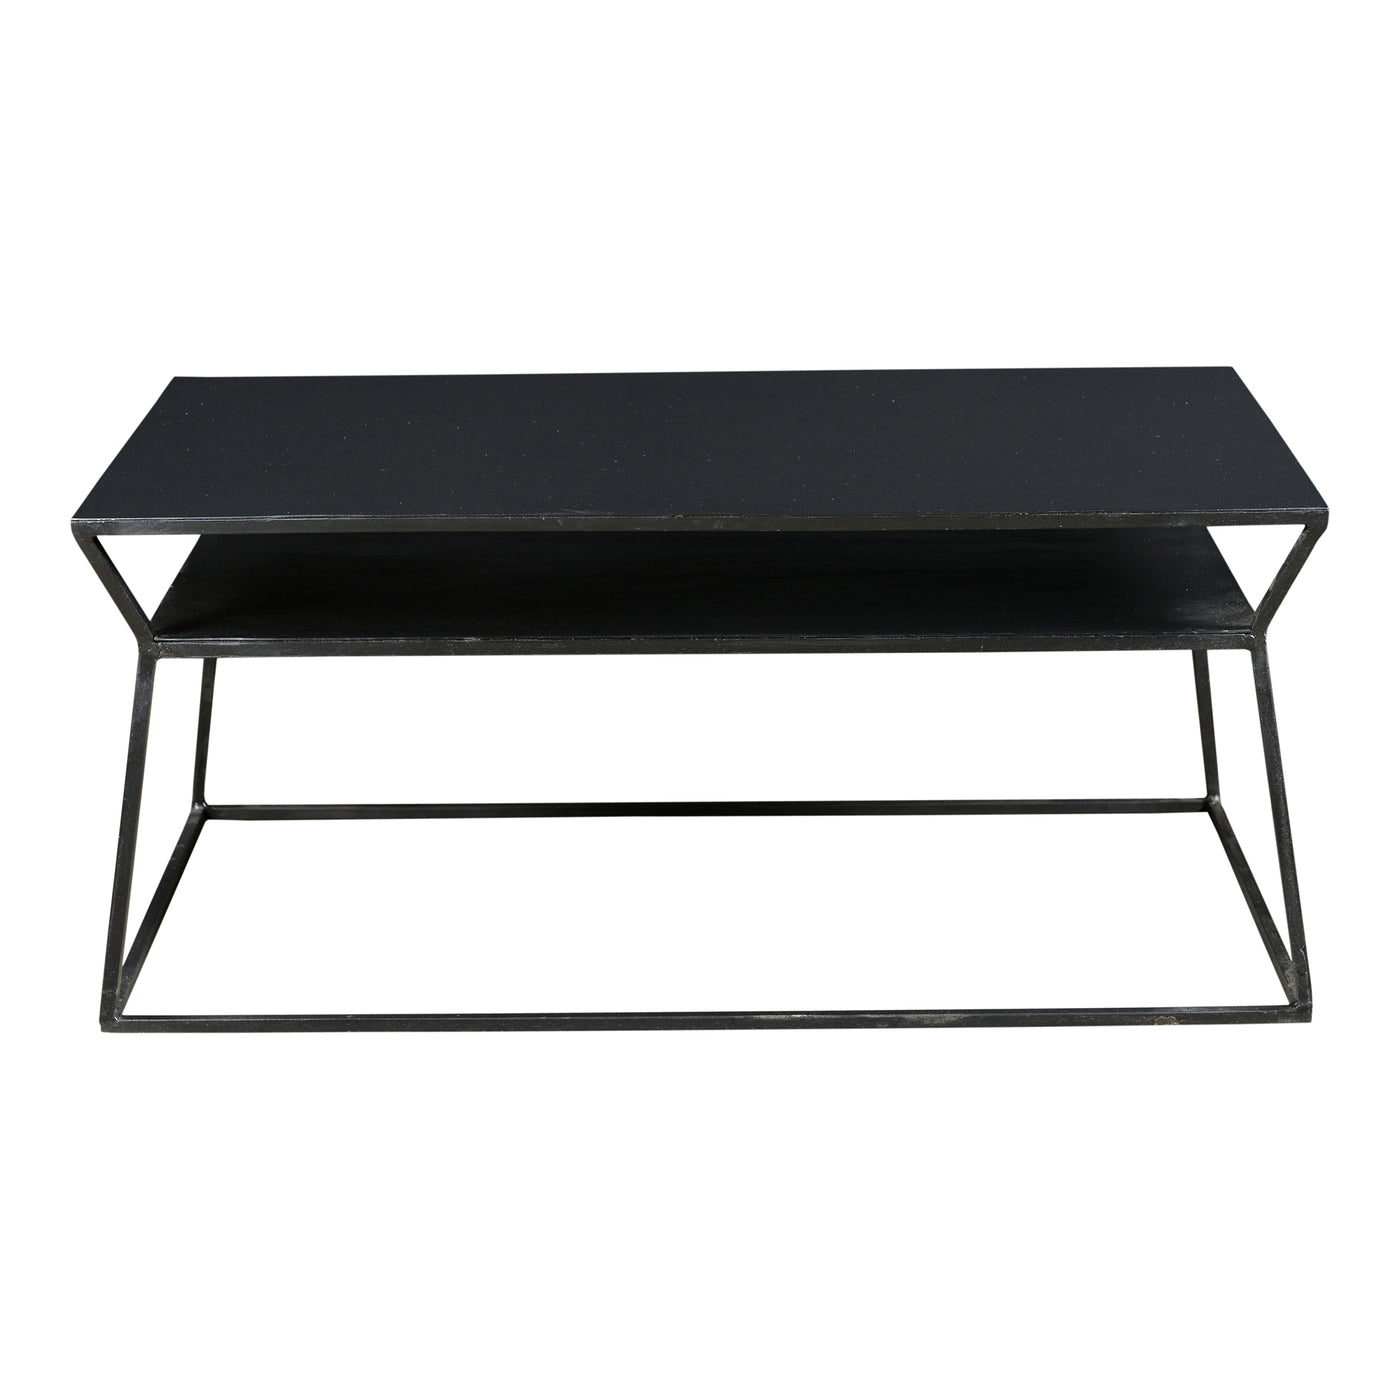 Ideal for small spaces, the Osaka Coffee Table features solid metal construction with a matt-black finish and two-tiered s...